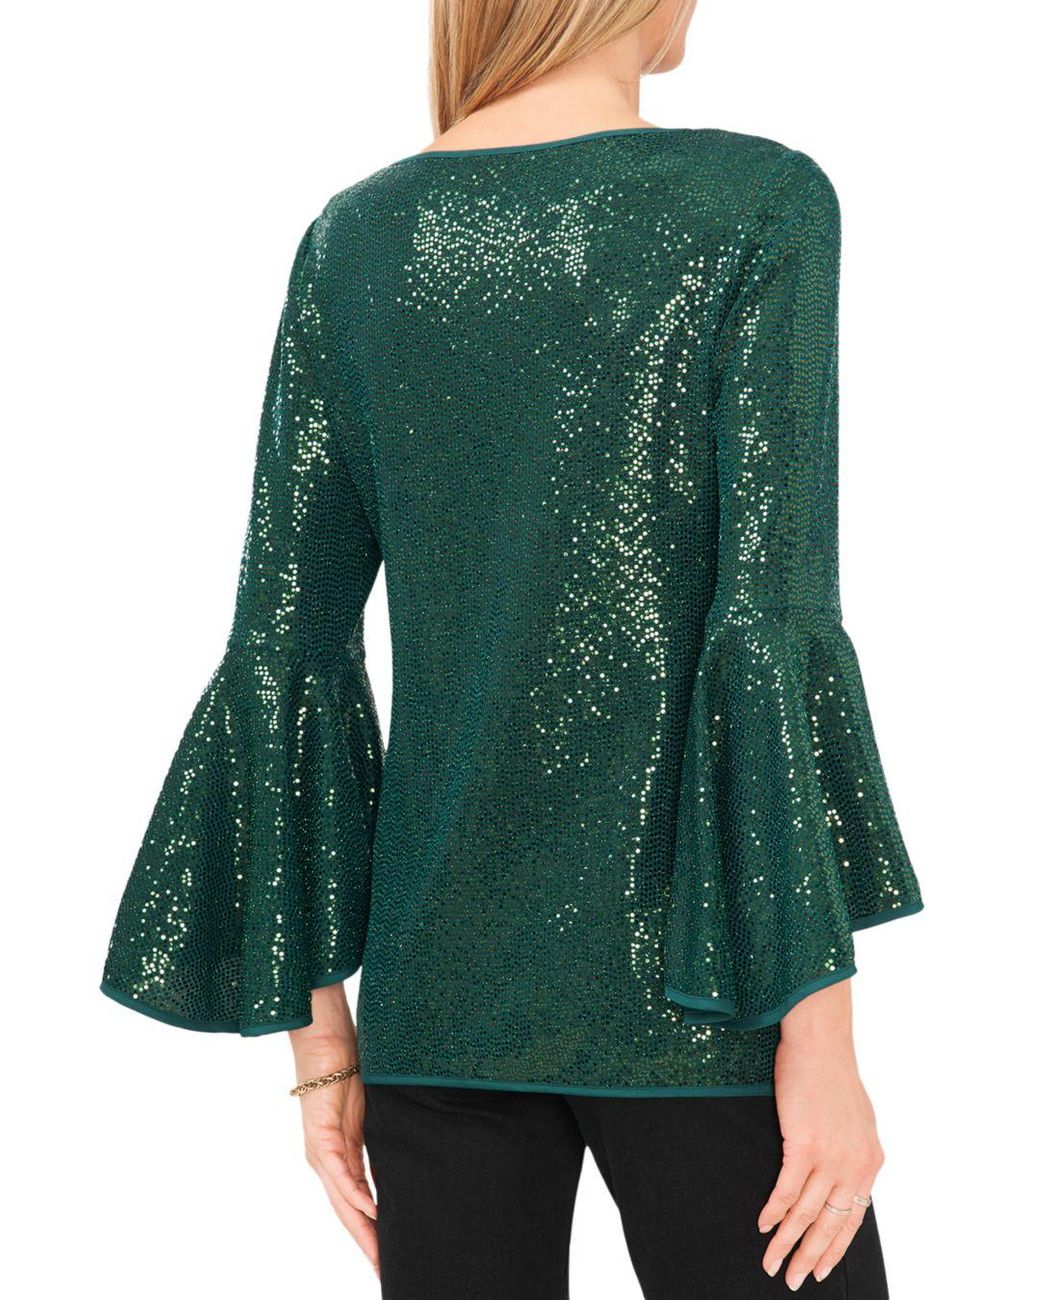 Vince Camuto Women's Green Sparkle Bell Sleeve Top